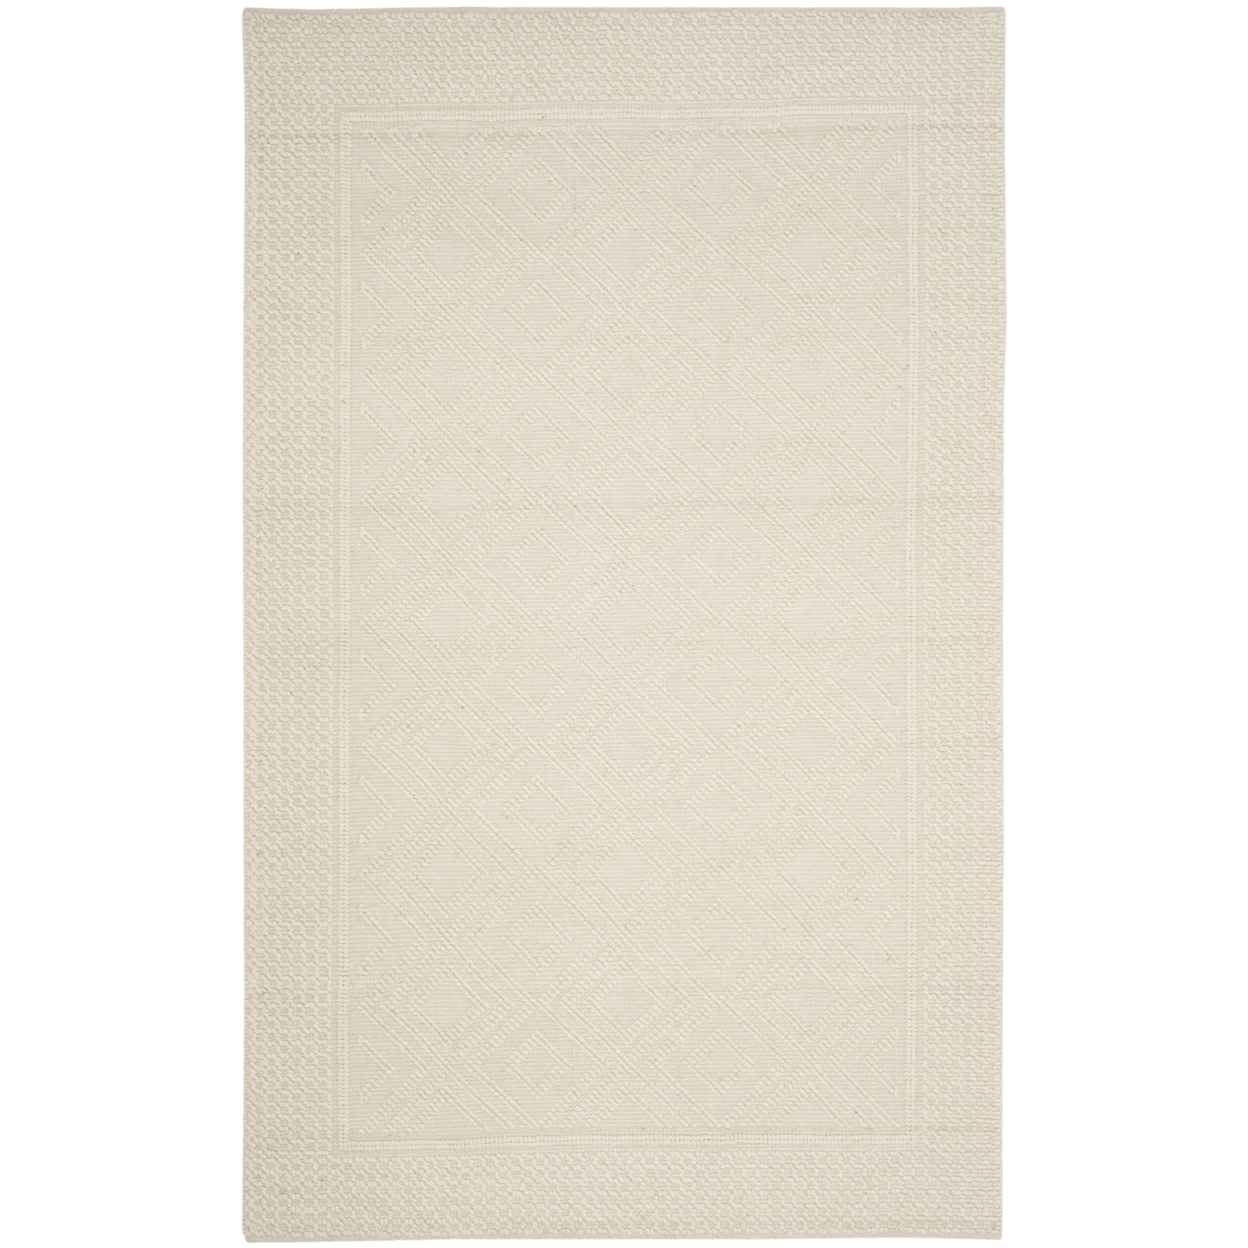 SAFAVIEH Vermont Collection VRM212A Handwoven Ivory Rug - 5 X 8